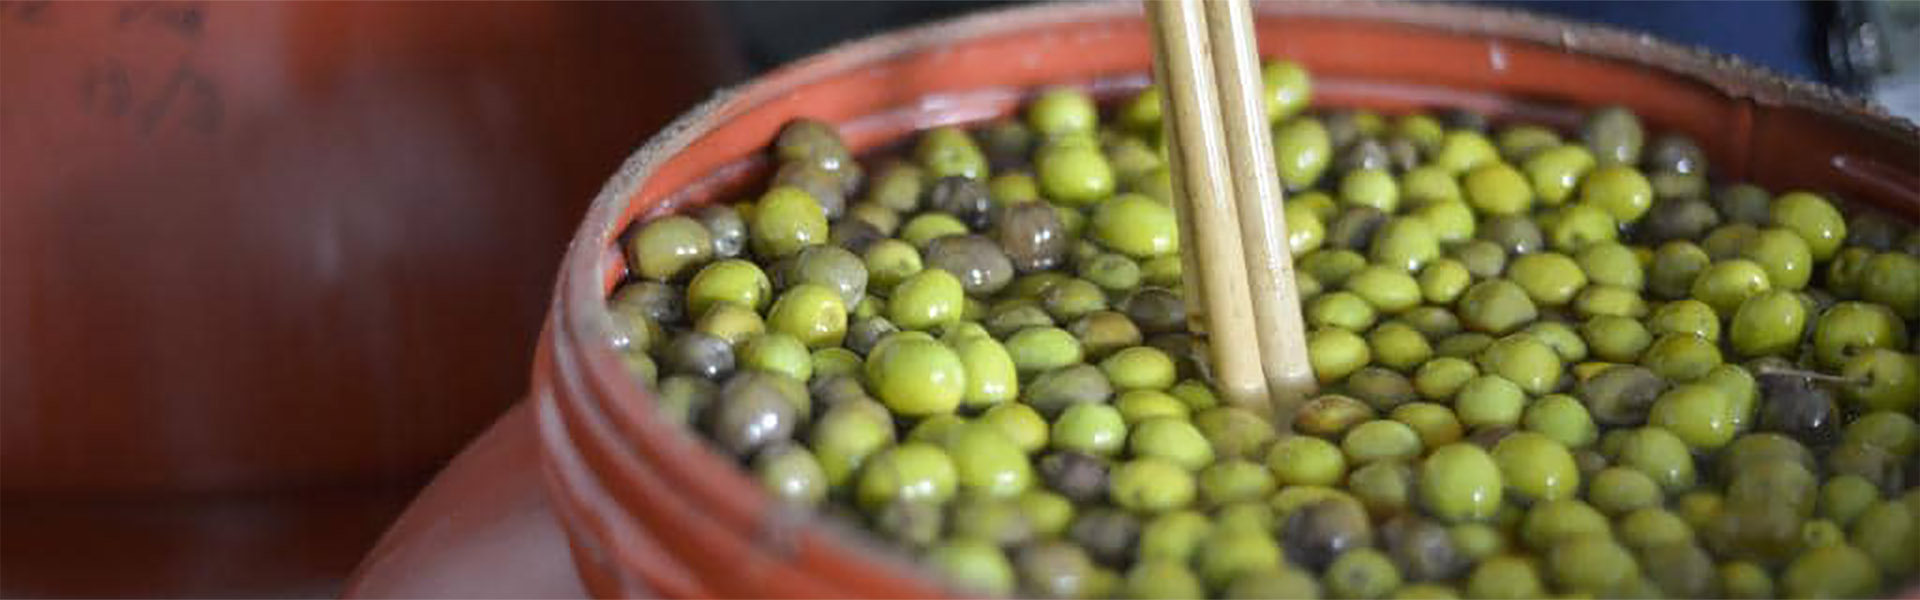 Australian olives in drum, credit Dannika Bonser and The Weekly Times